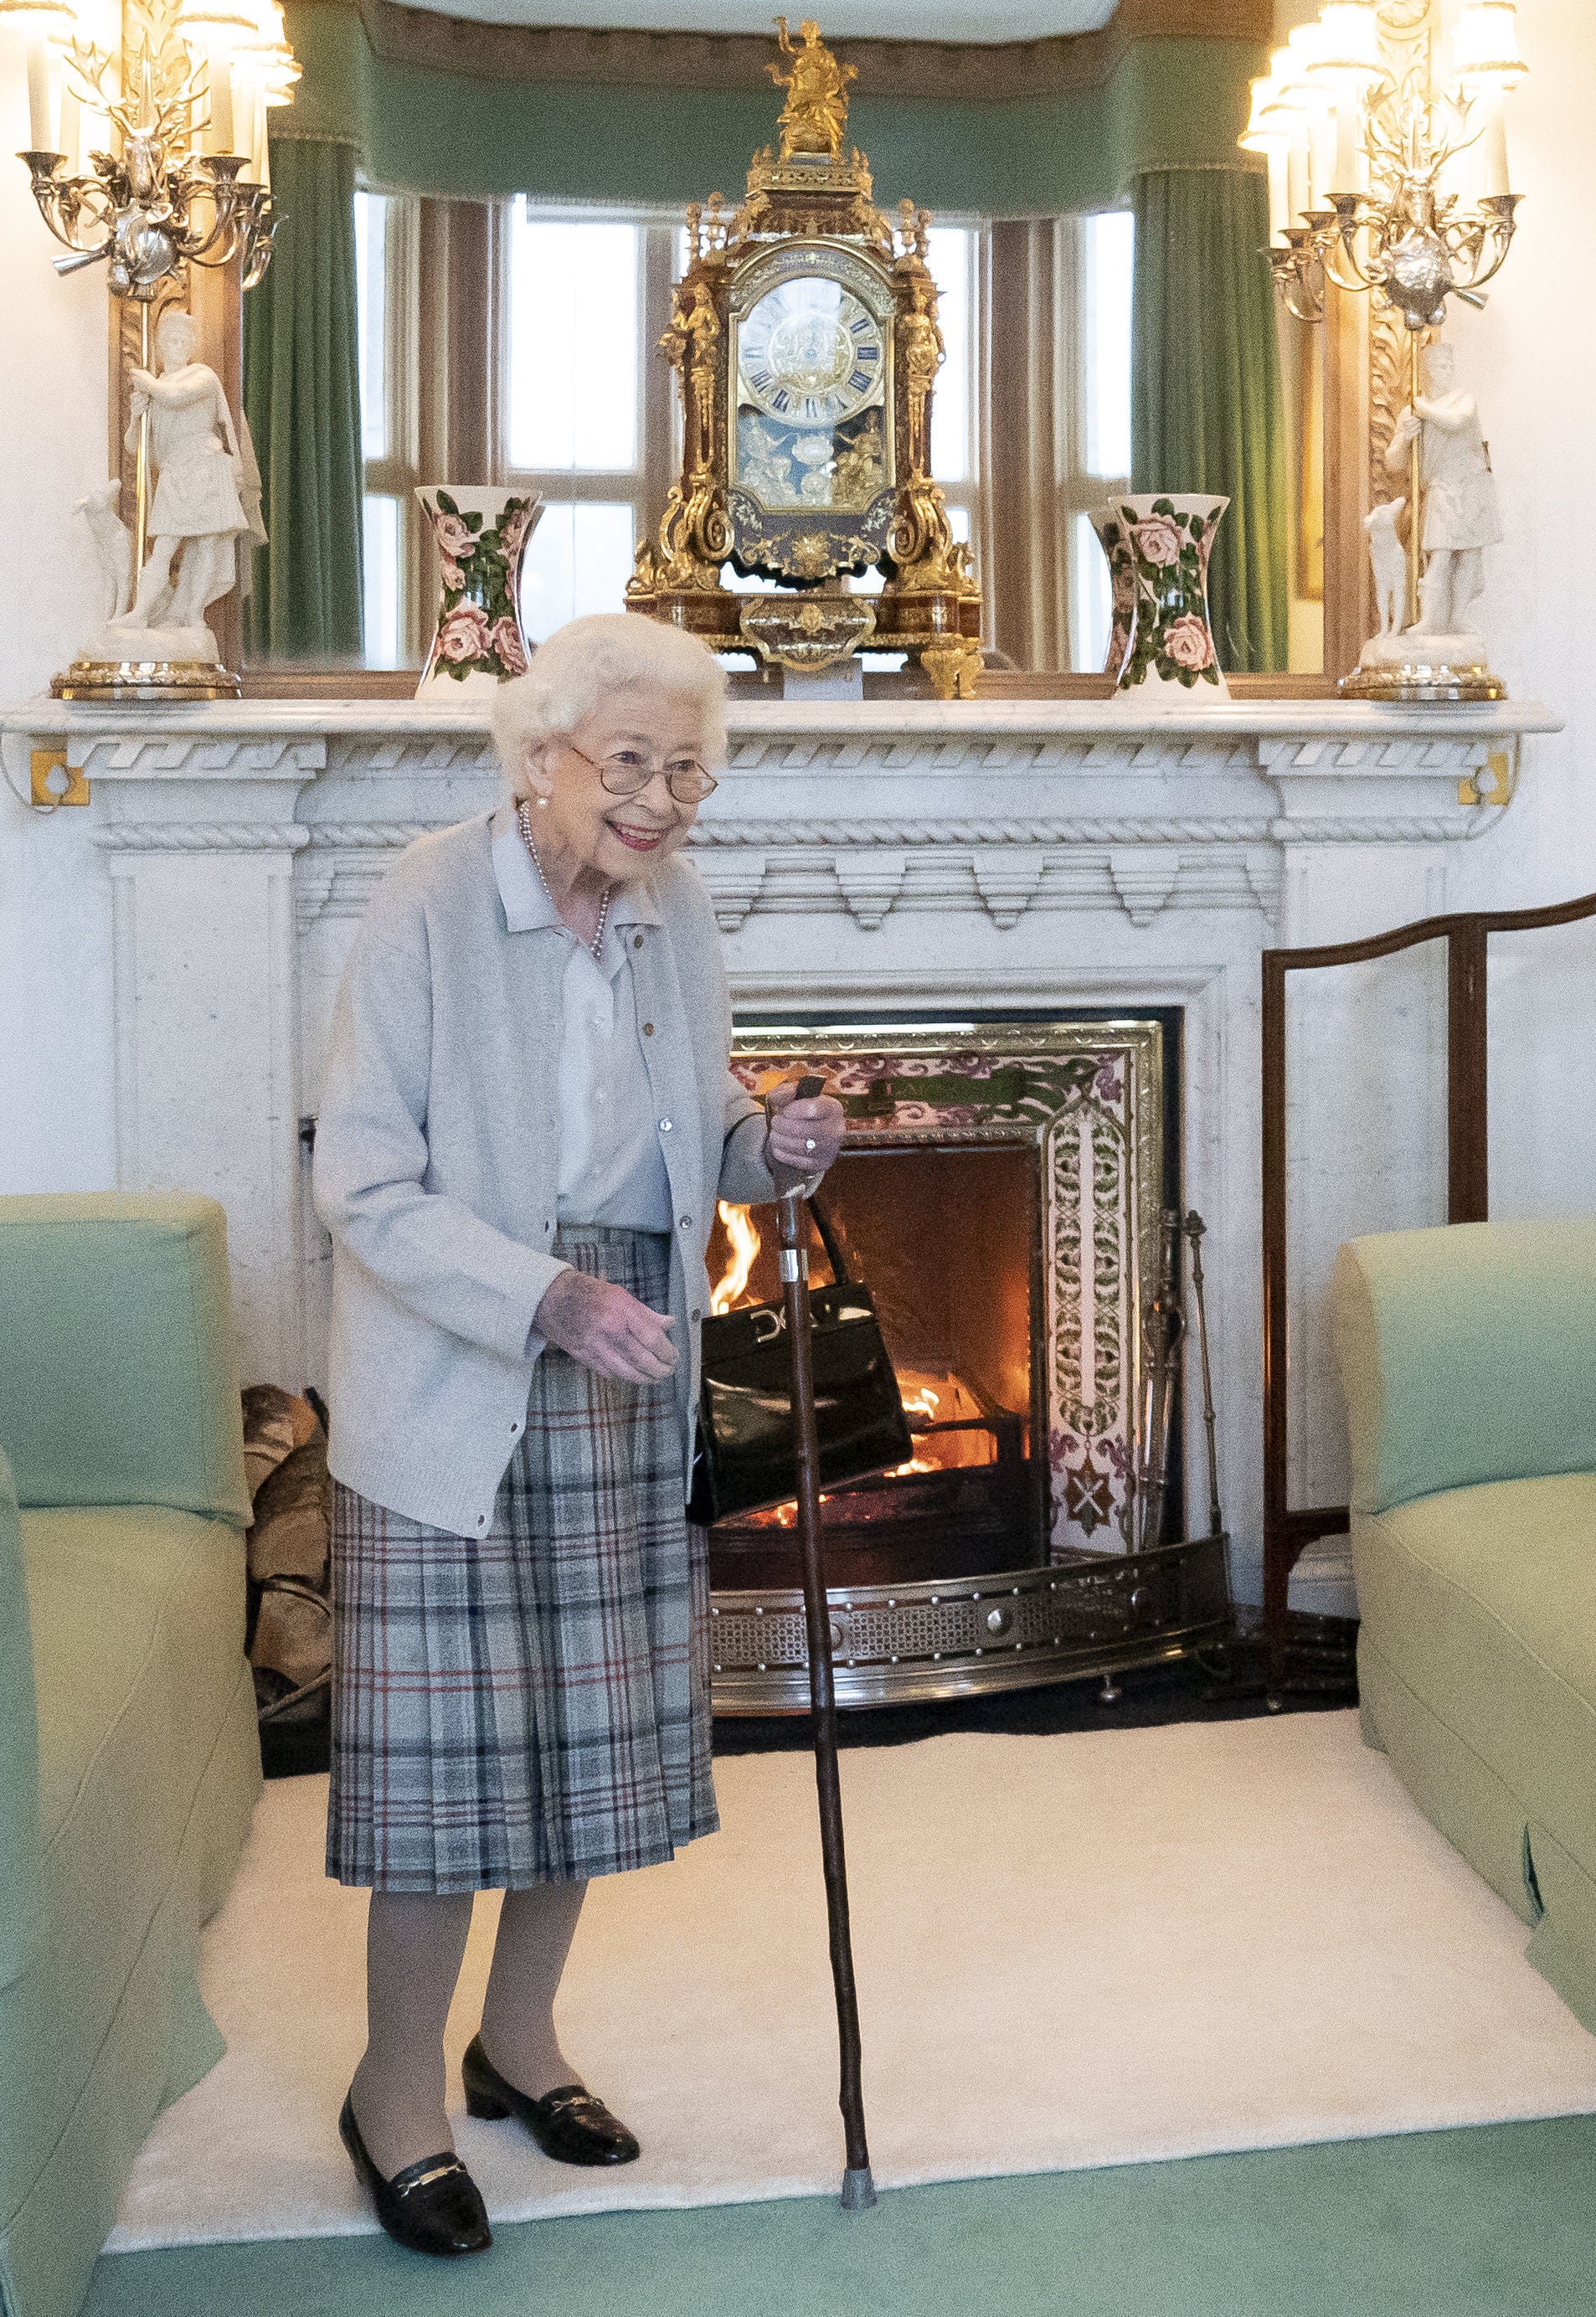 Concerns were raised for Queen Elizabeth II when she was seen with a walking stick in a rare appearance before her death